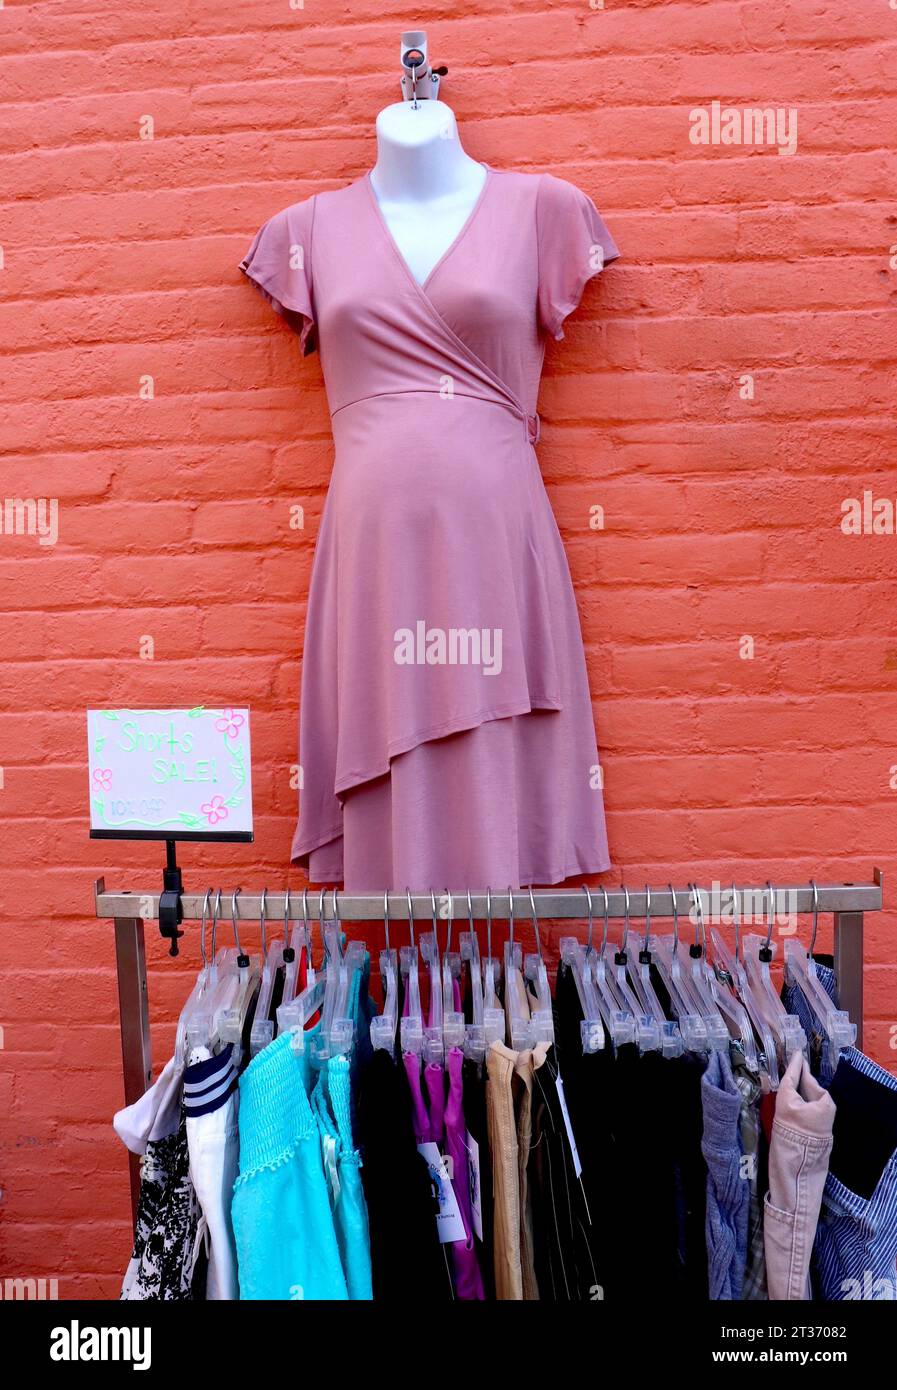 Hallandale Florida Miami,The Village at Gulfstream Park shopping,sign clearance  sale 75% women's clothing dress fashion Stock Photo - Alamy